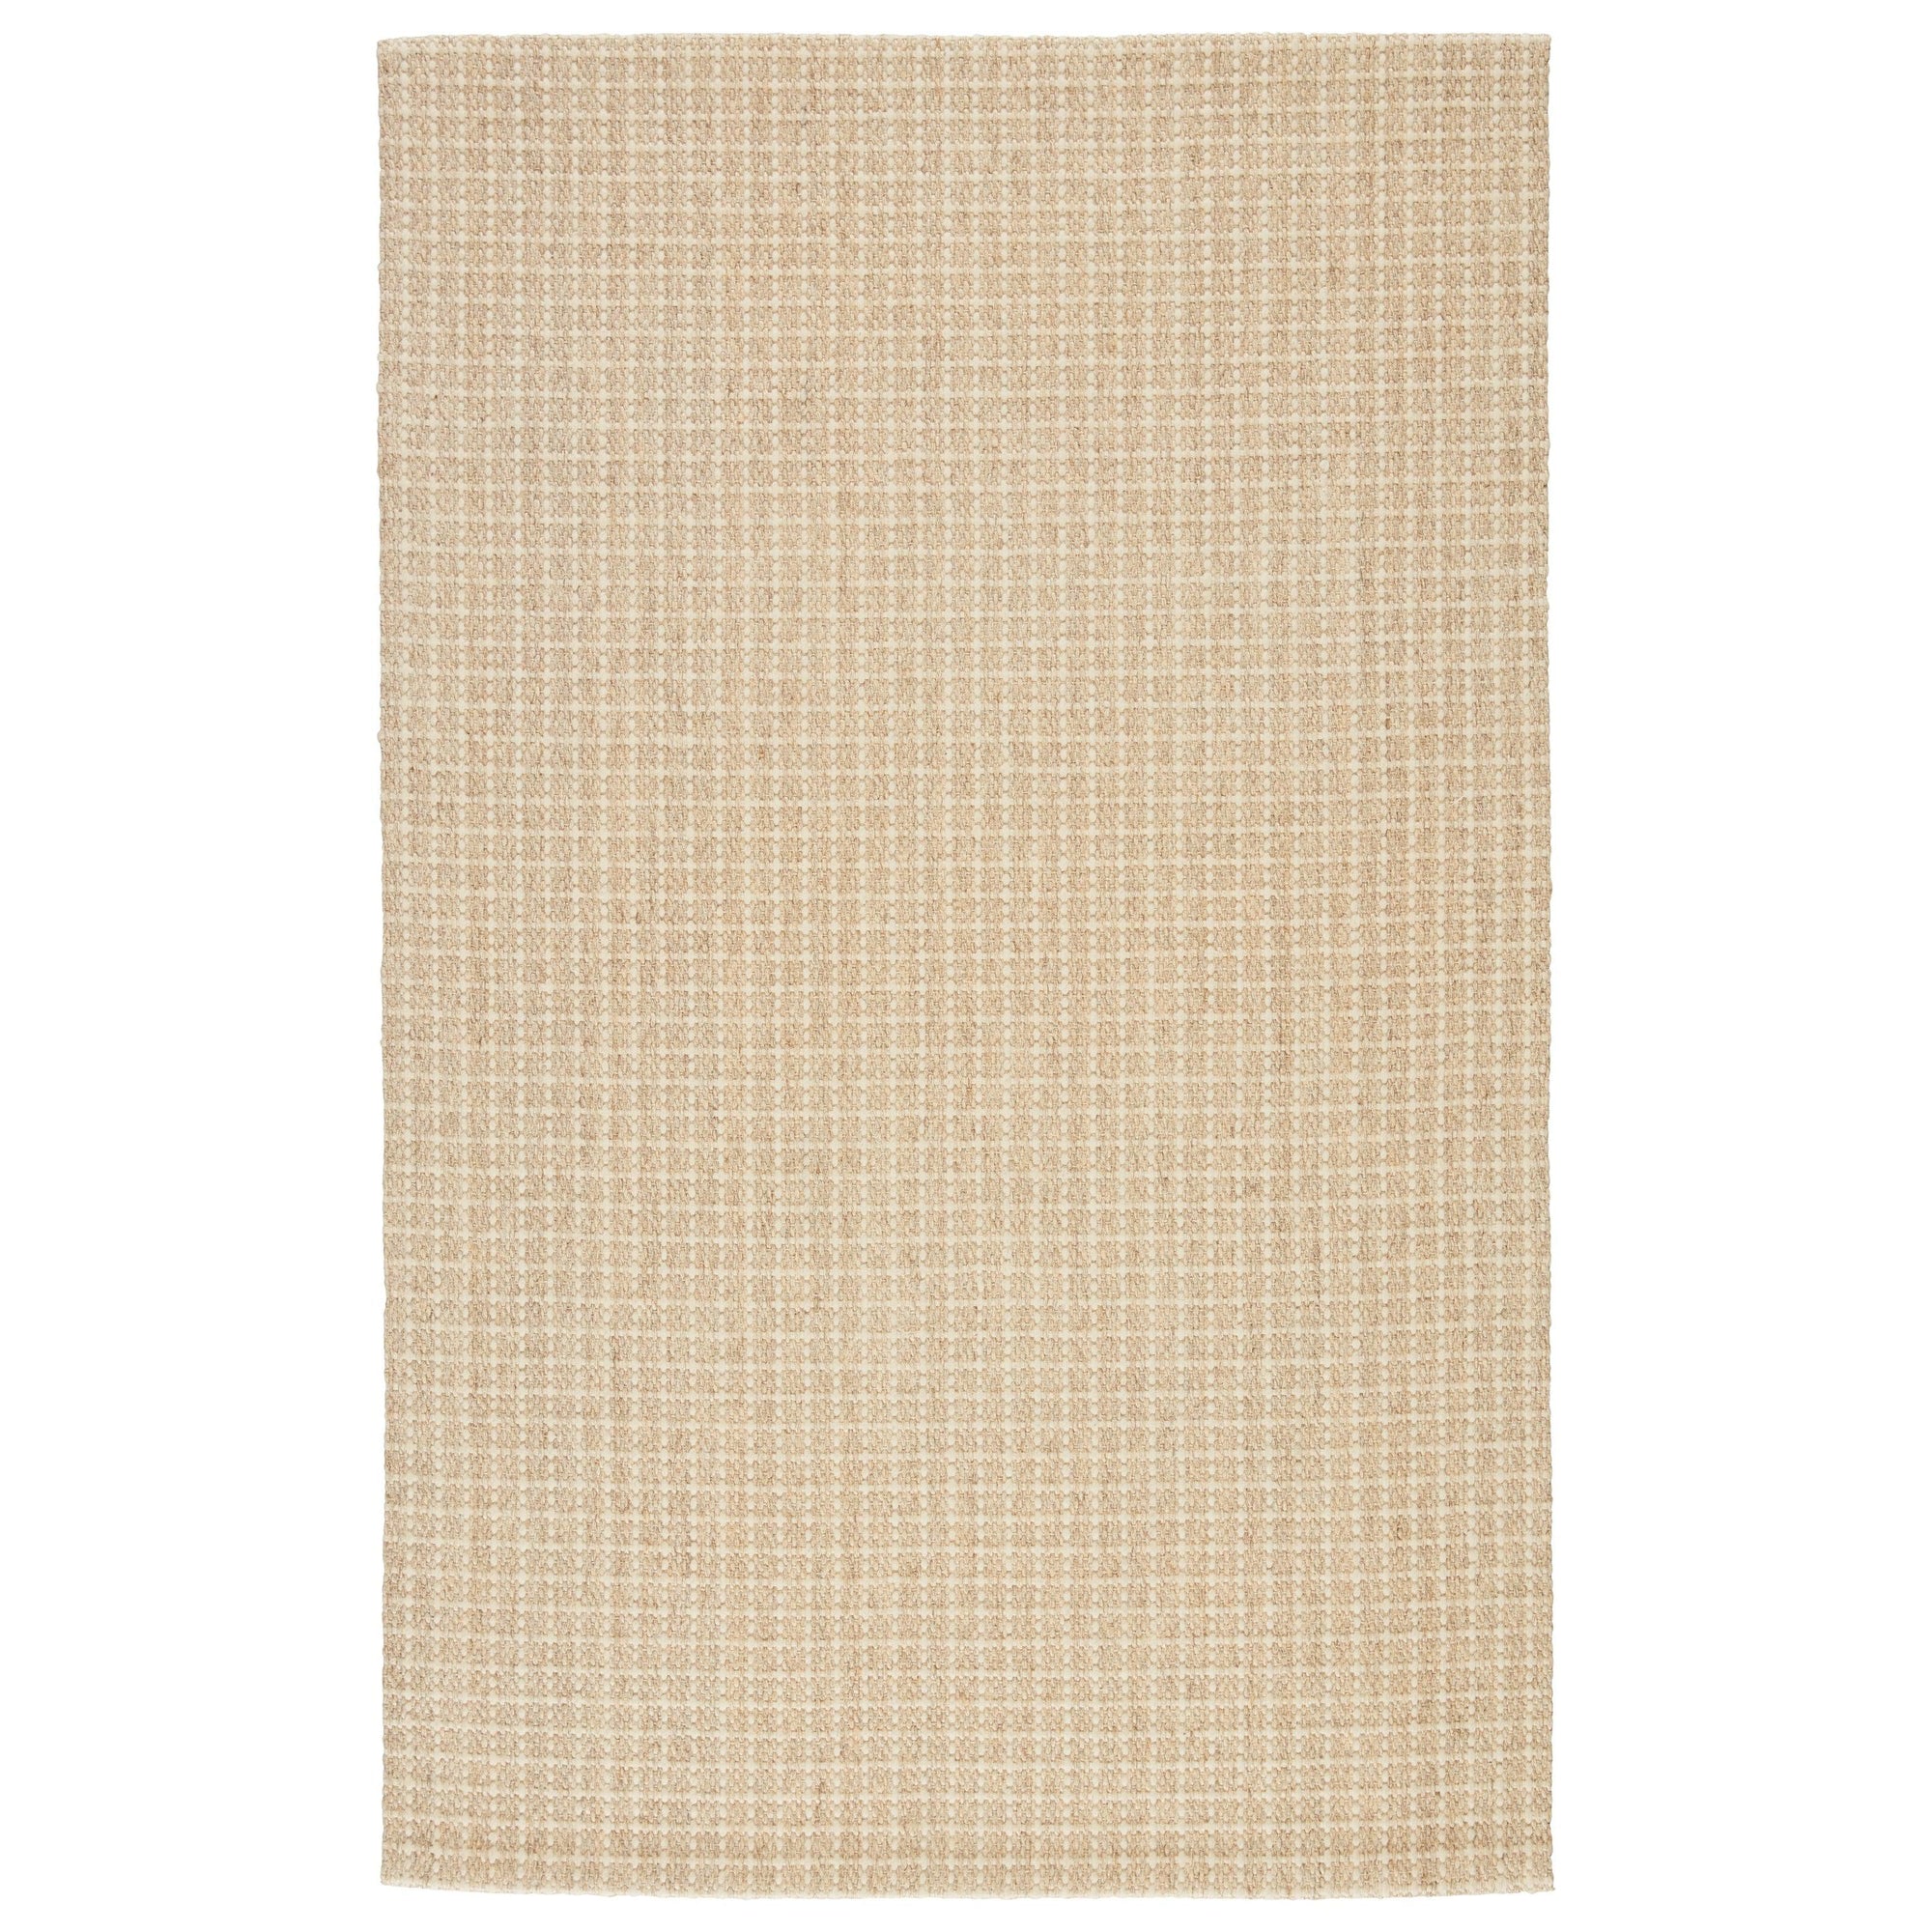 Rugs by Roo | Jaipur Living Tane Natural Solid Beige Ivory Area Rug-RUG145966